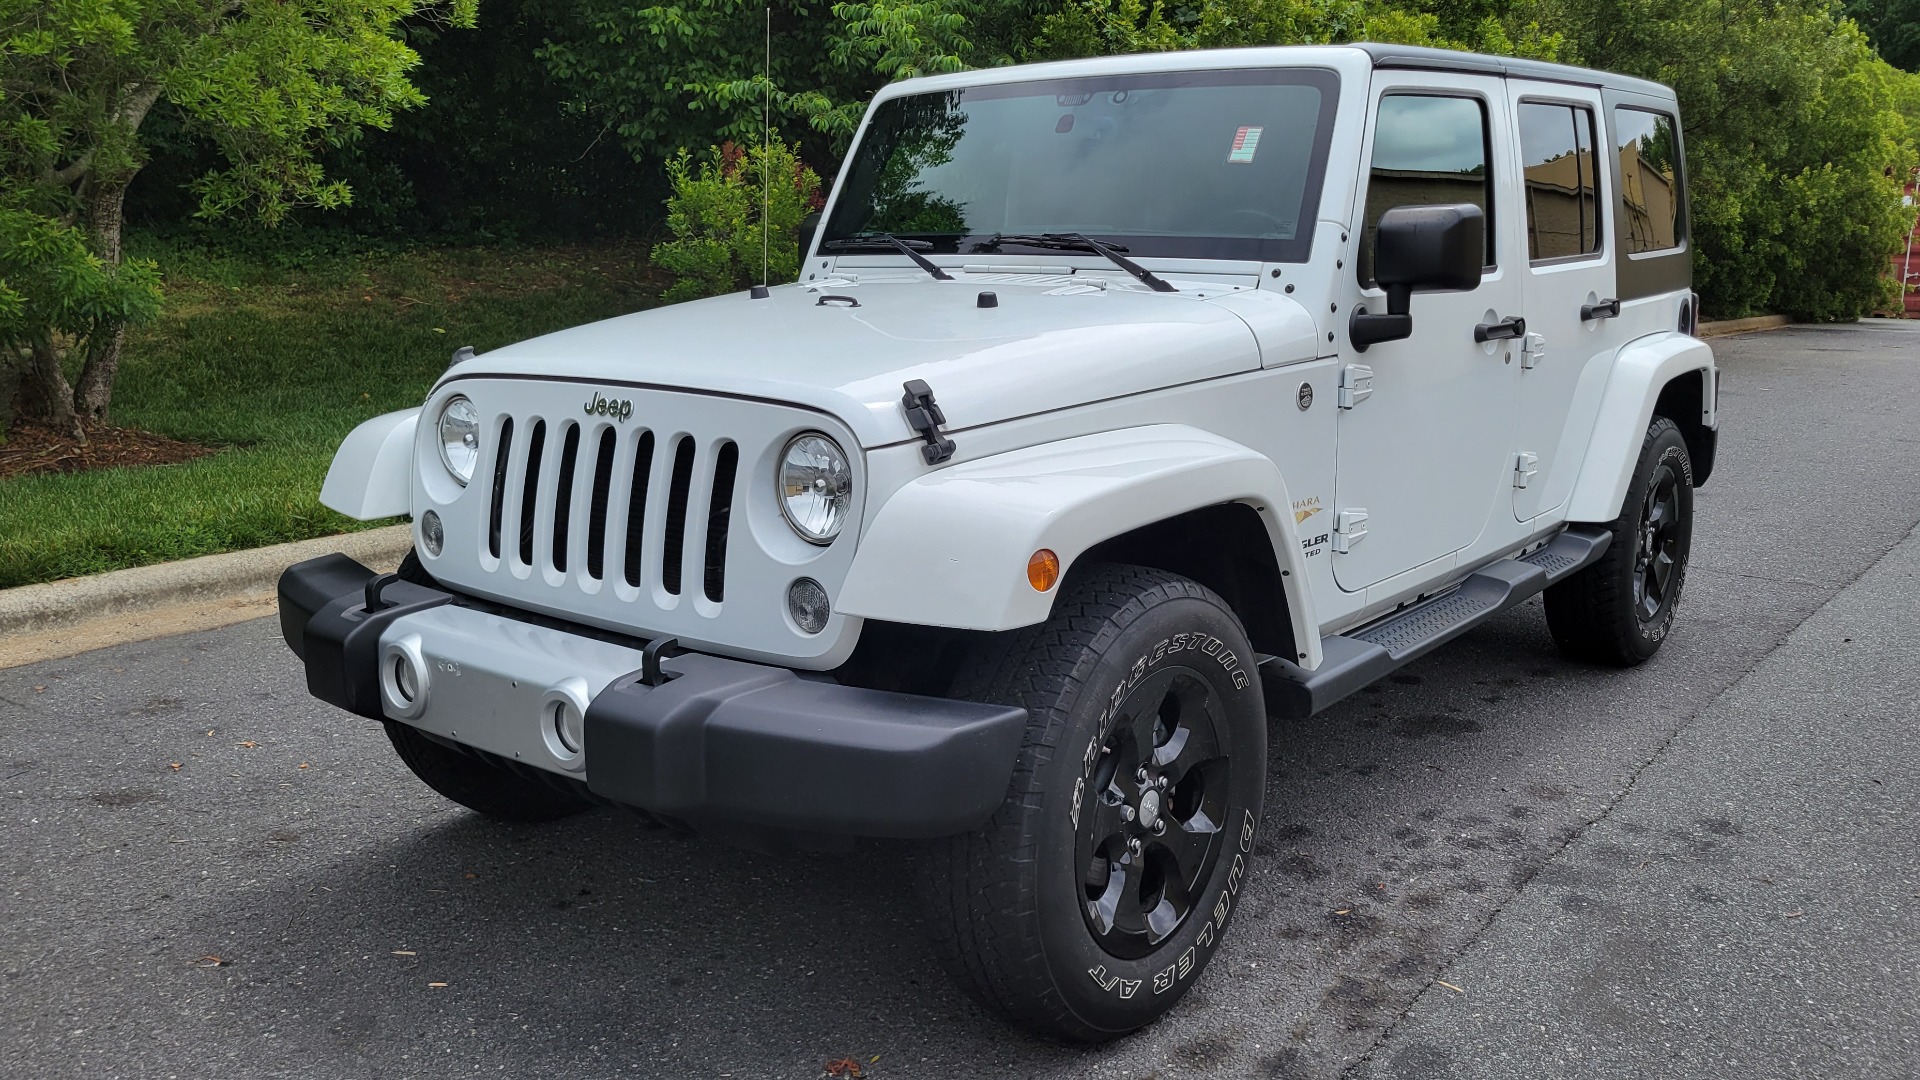 Used 2015 Jeep WRANGLER UNLIMITED SAHARA 4X4 / 3.6L / AUTO / 3-PC HARD-TOP / NAVIGATION for sale $33,995 at Formula Imports in Charlotte NC 28227 1